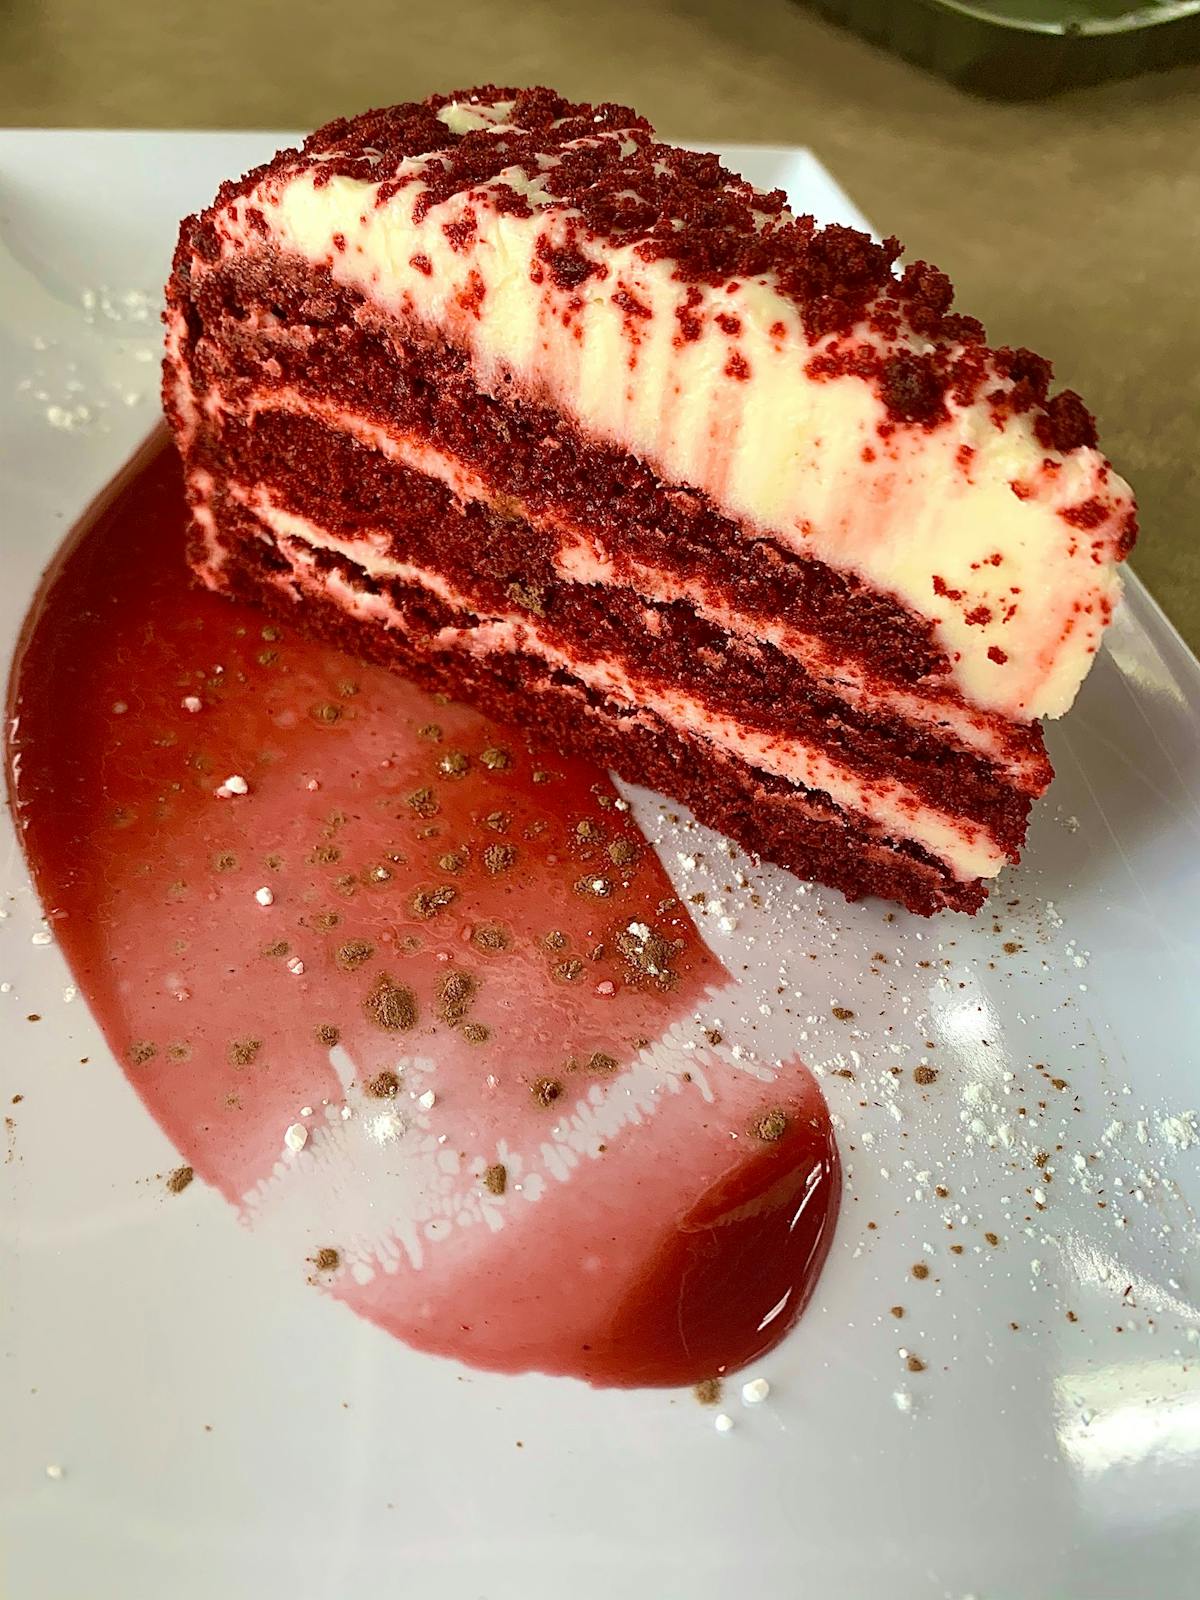 a close up of a piece of cake on a plate